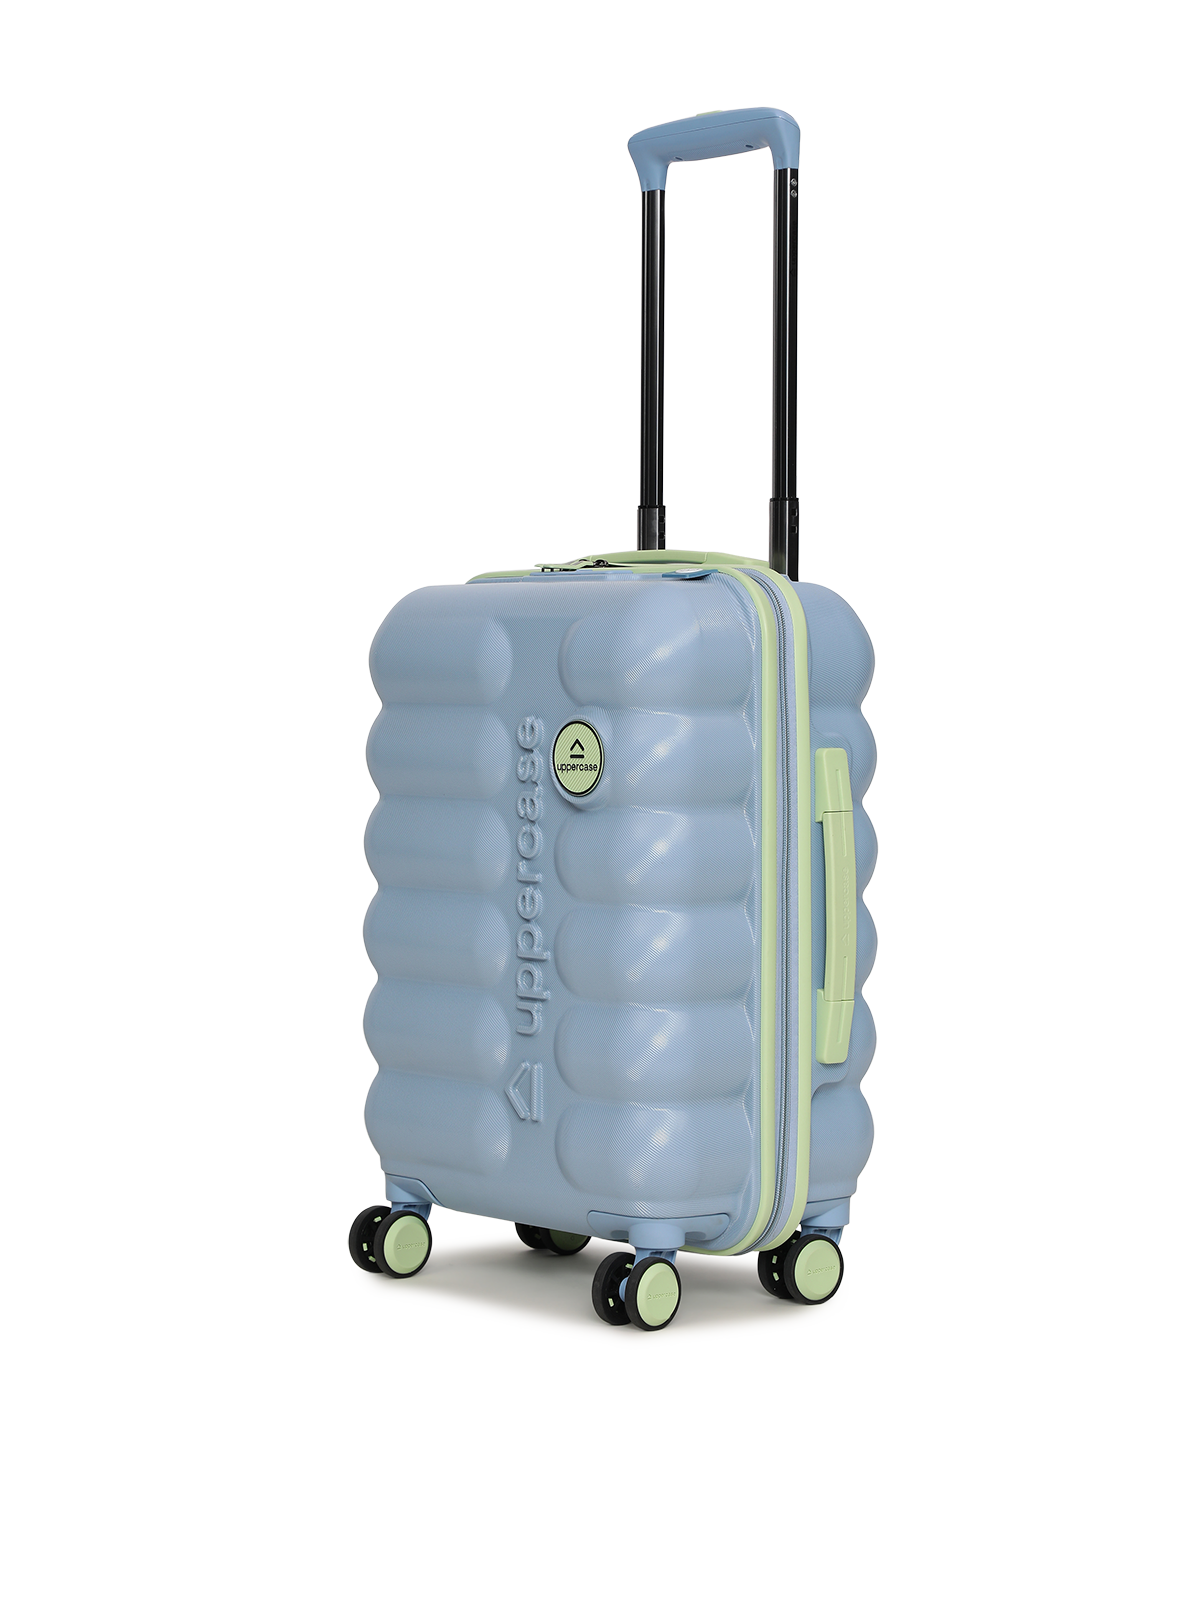 uppercase Astro 56cm (Small) | Cabin Trolley Bag | Sustainable Hardsided Luggage | Dual Wheel Suitcase | Flushed TSA Lock & Anti-Theft Zippers | Suitcase for Men & Women | 2000 Days Warranty (Powder Blue)